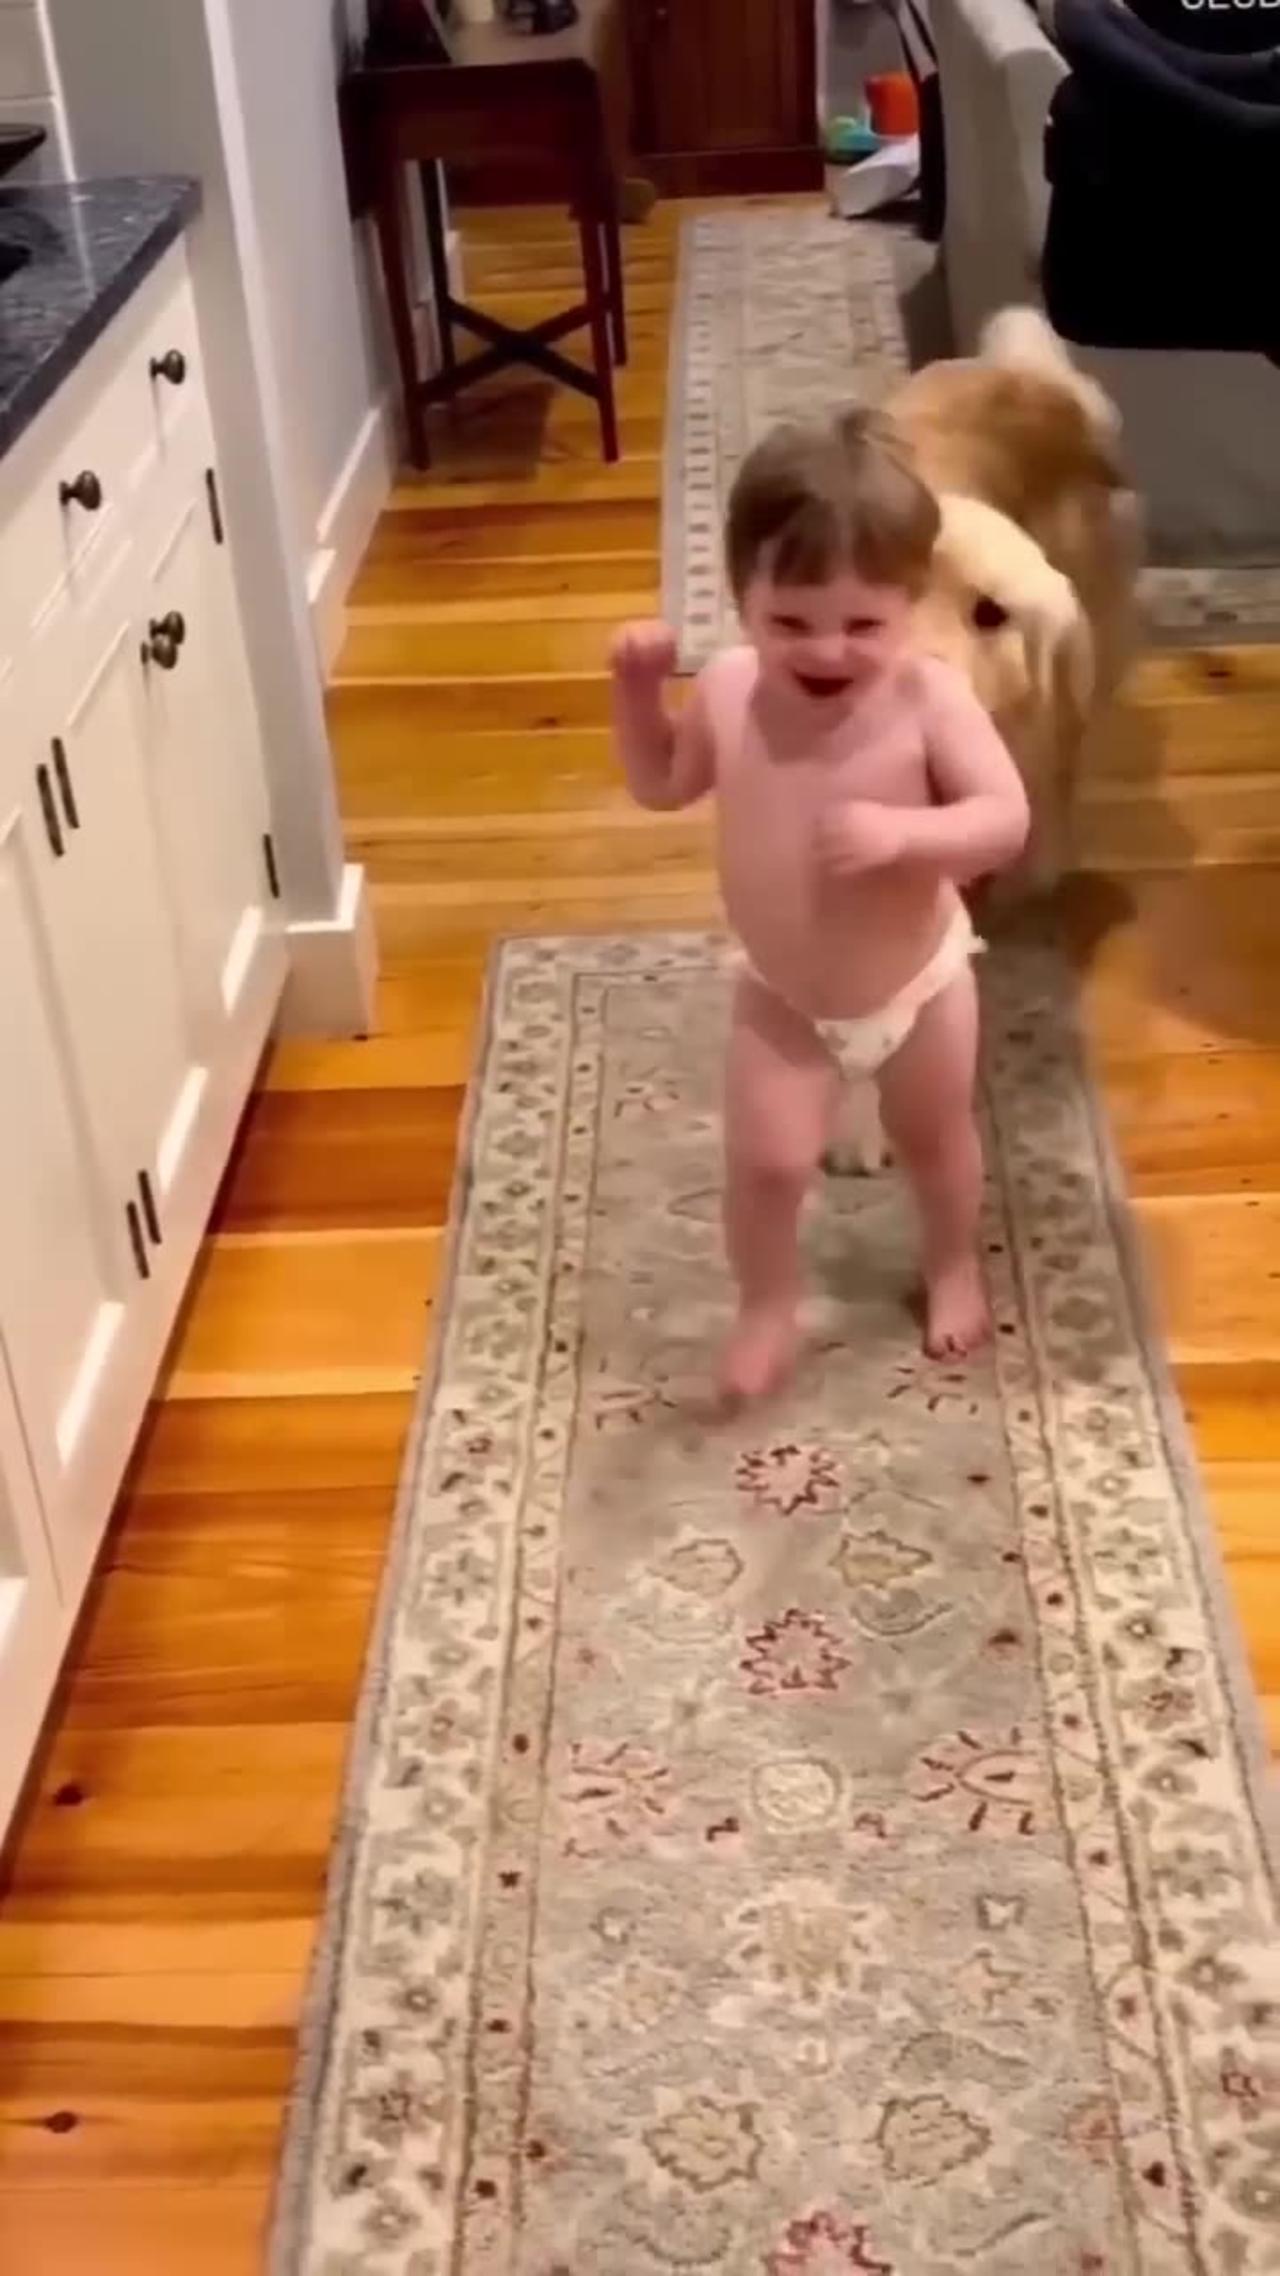 Cute baby enjoys playing with dog 🤭🥰🤭 #shorts #shortsfeed #cute #baby #cutebaby #trending.mp4